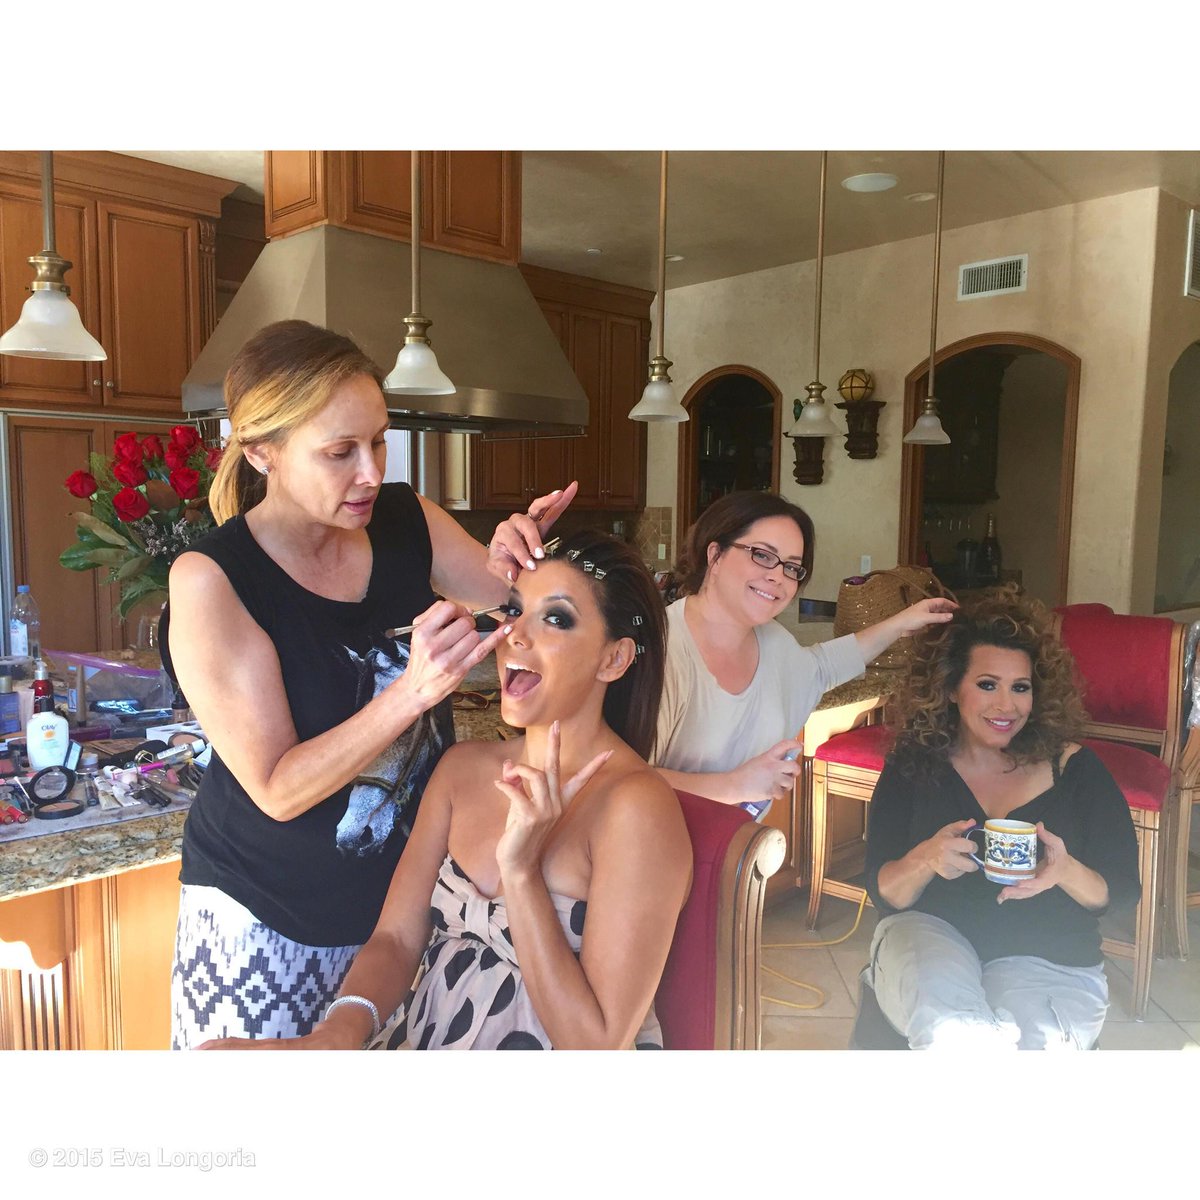 Getting ready for the Evening Before Emmy parties with @DianaMariaRiva @MakeupByElan @etienneortega   @NaniKanani! http://t.co/7TxeRyYdRa